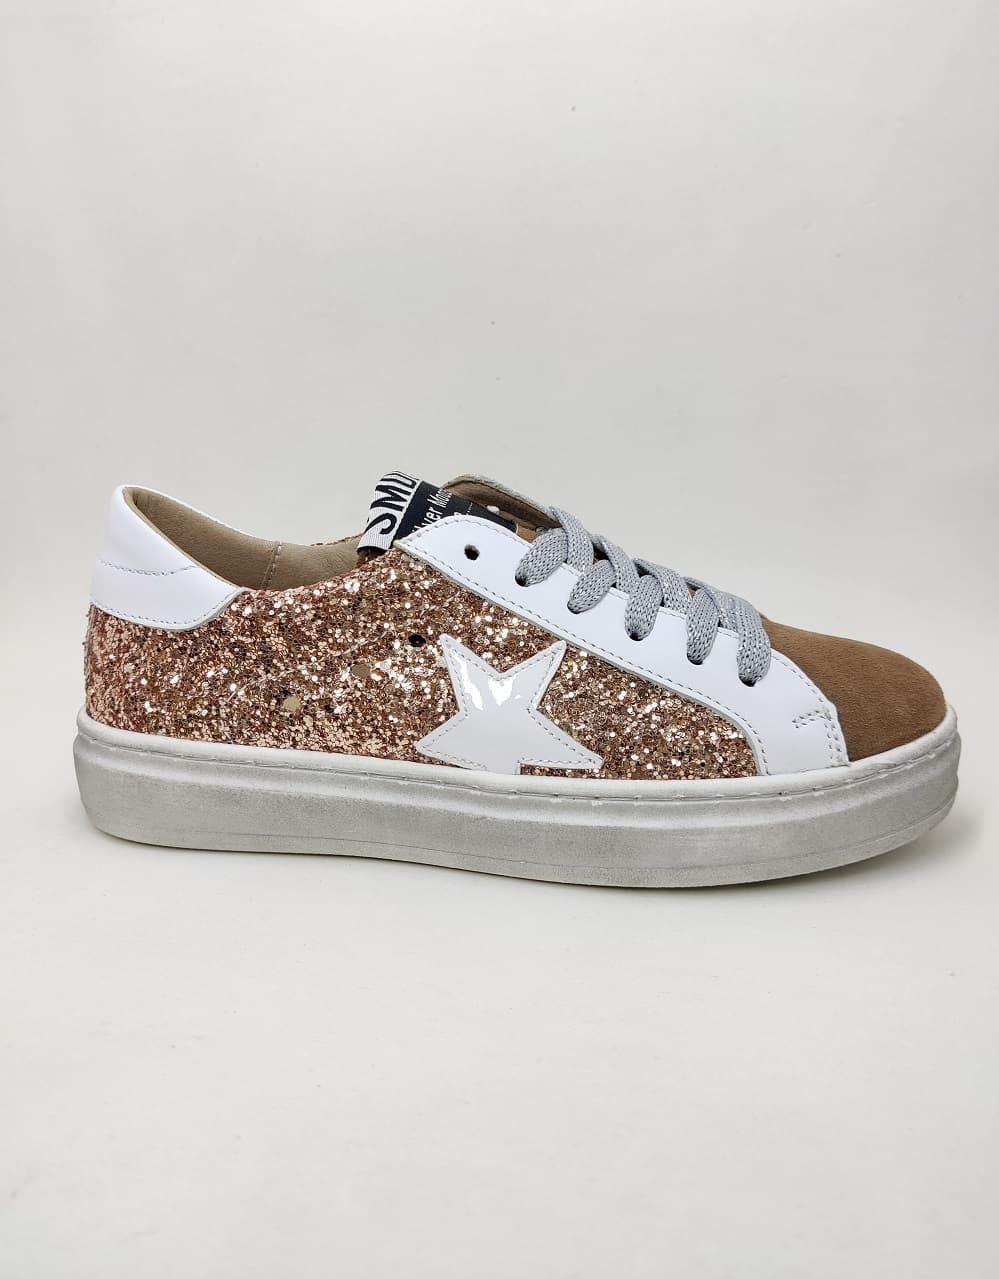 Golden Star Sneakers in Glitter Nude and Mink - Image 1